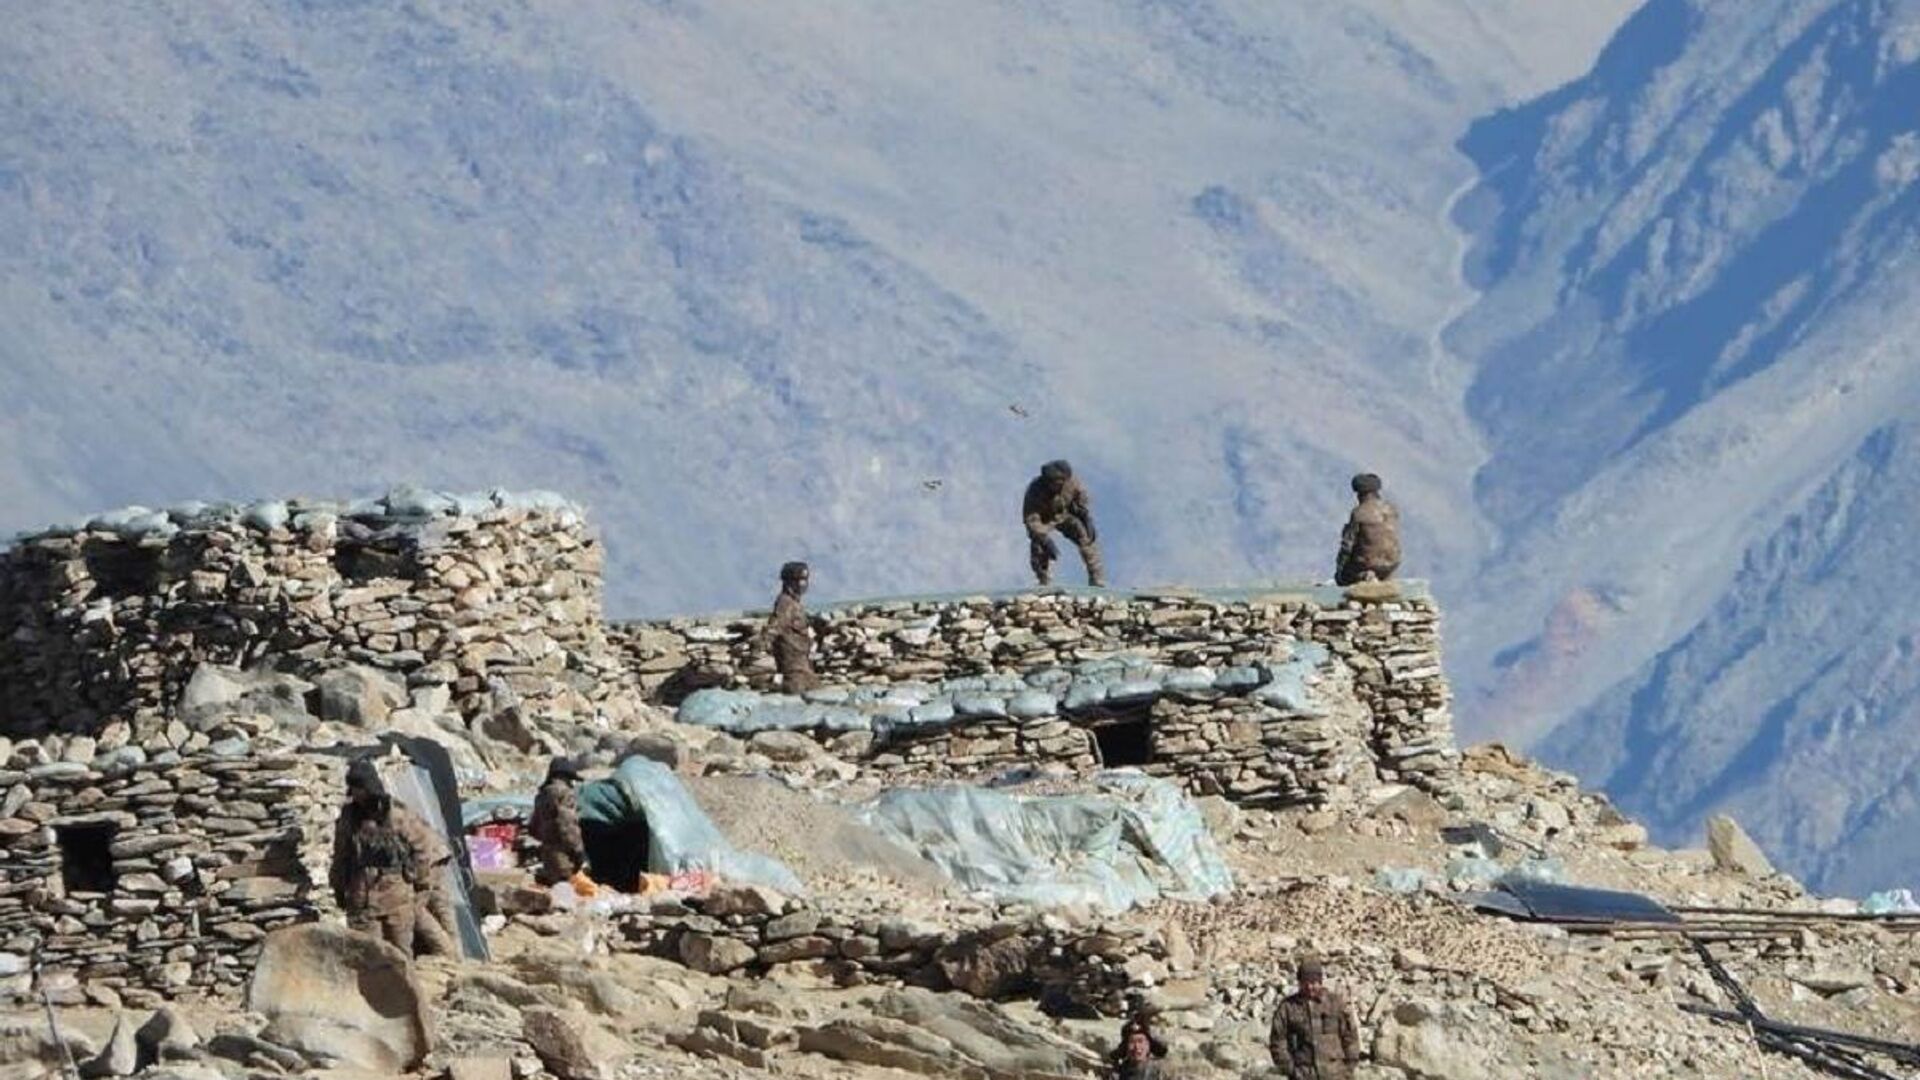 This photograph provided by the Indian Army, according to them shows Chinese troops dismantling their bunkers at Pangong Tso region, in Ladakh along the India-China border on Monday, Feb.15, 2021 - Sputnik International, 1920, 05.10.2021